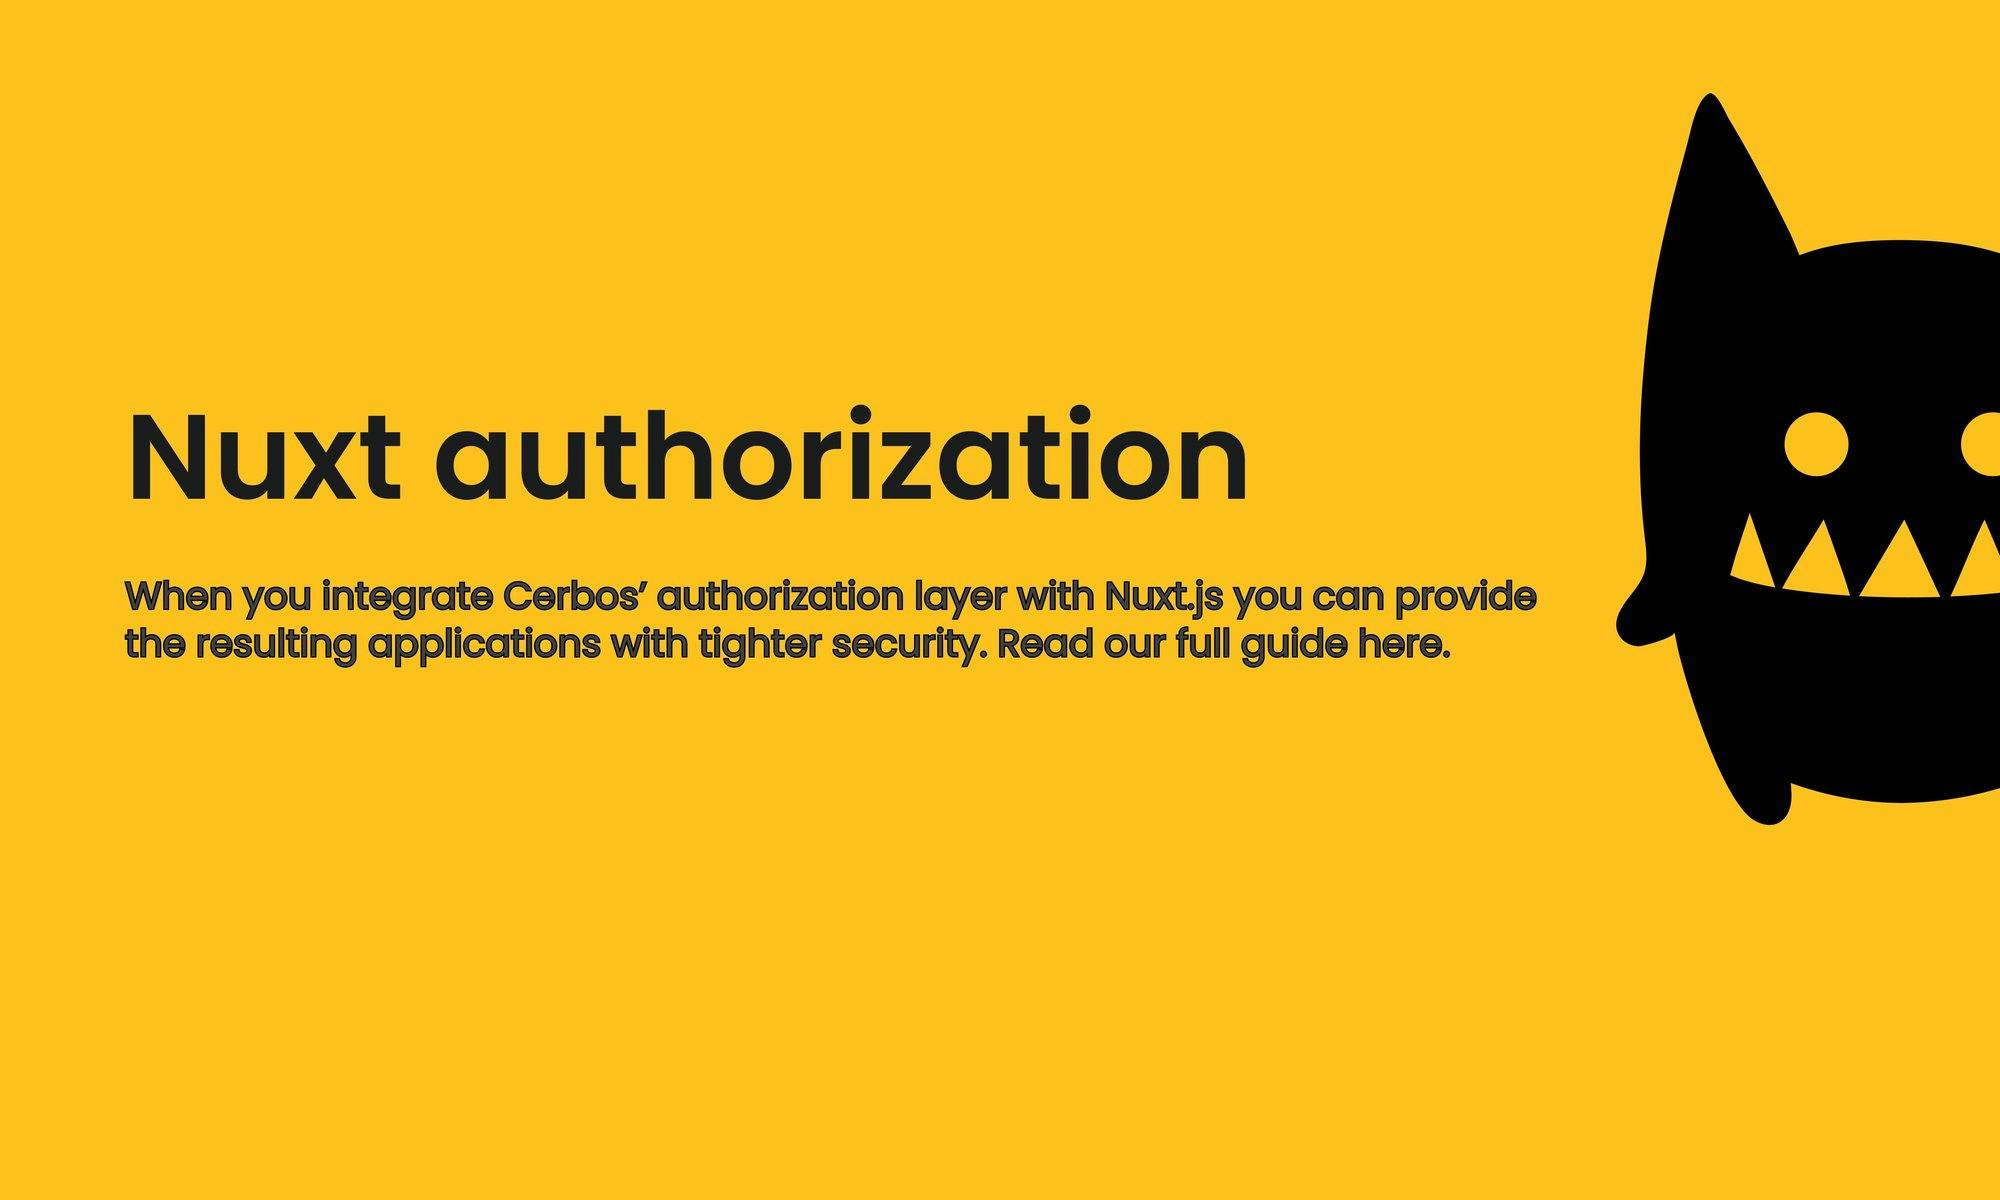 Nuxt authorization: How to get fine-grained access control